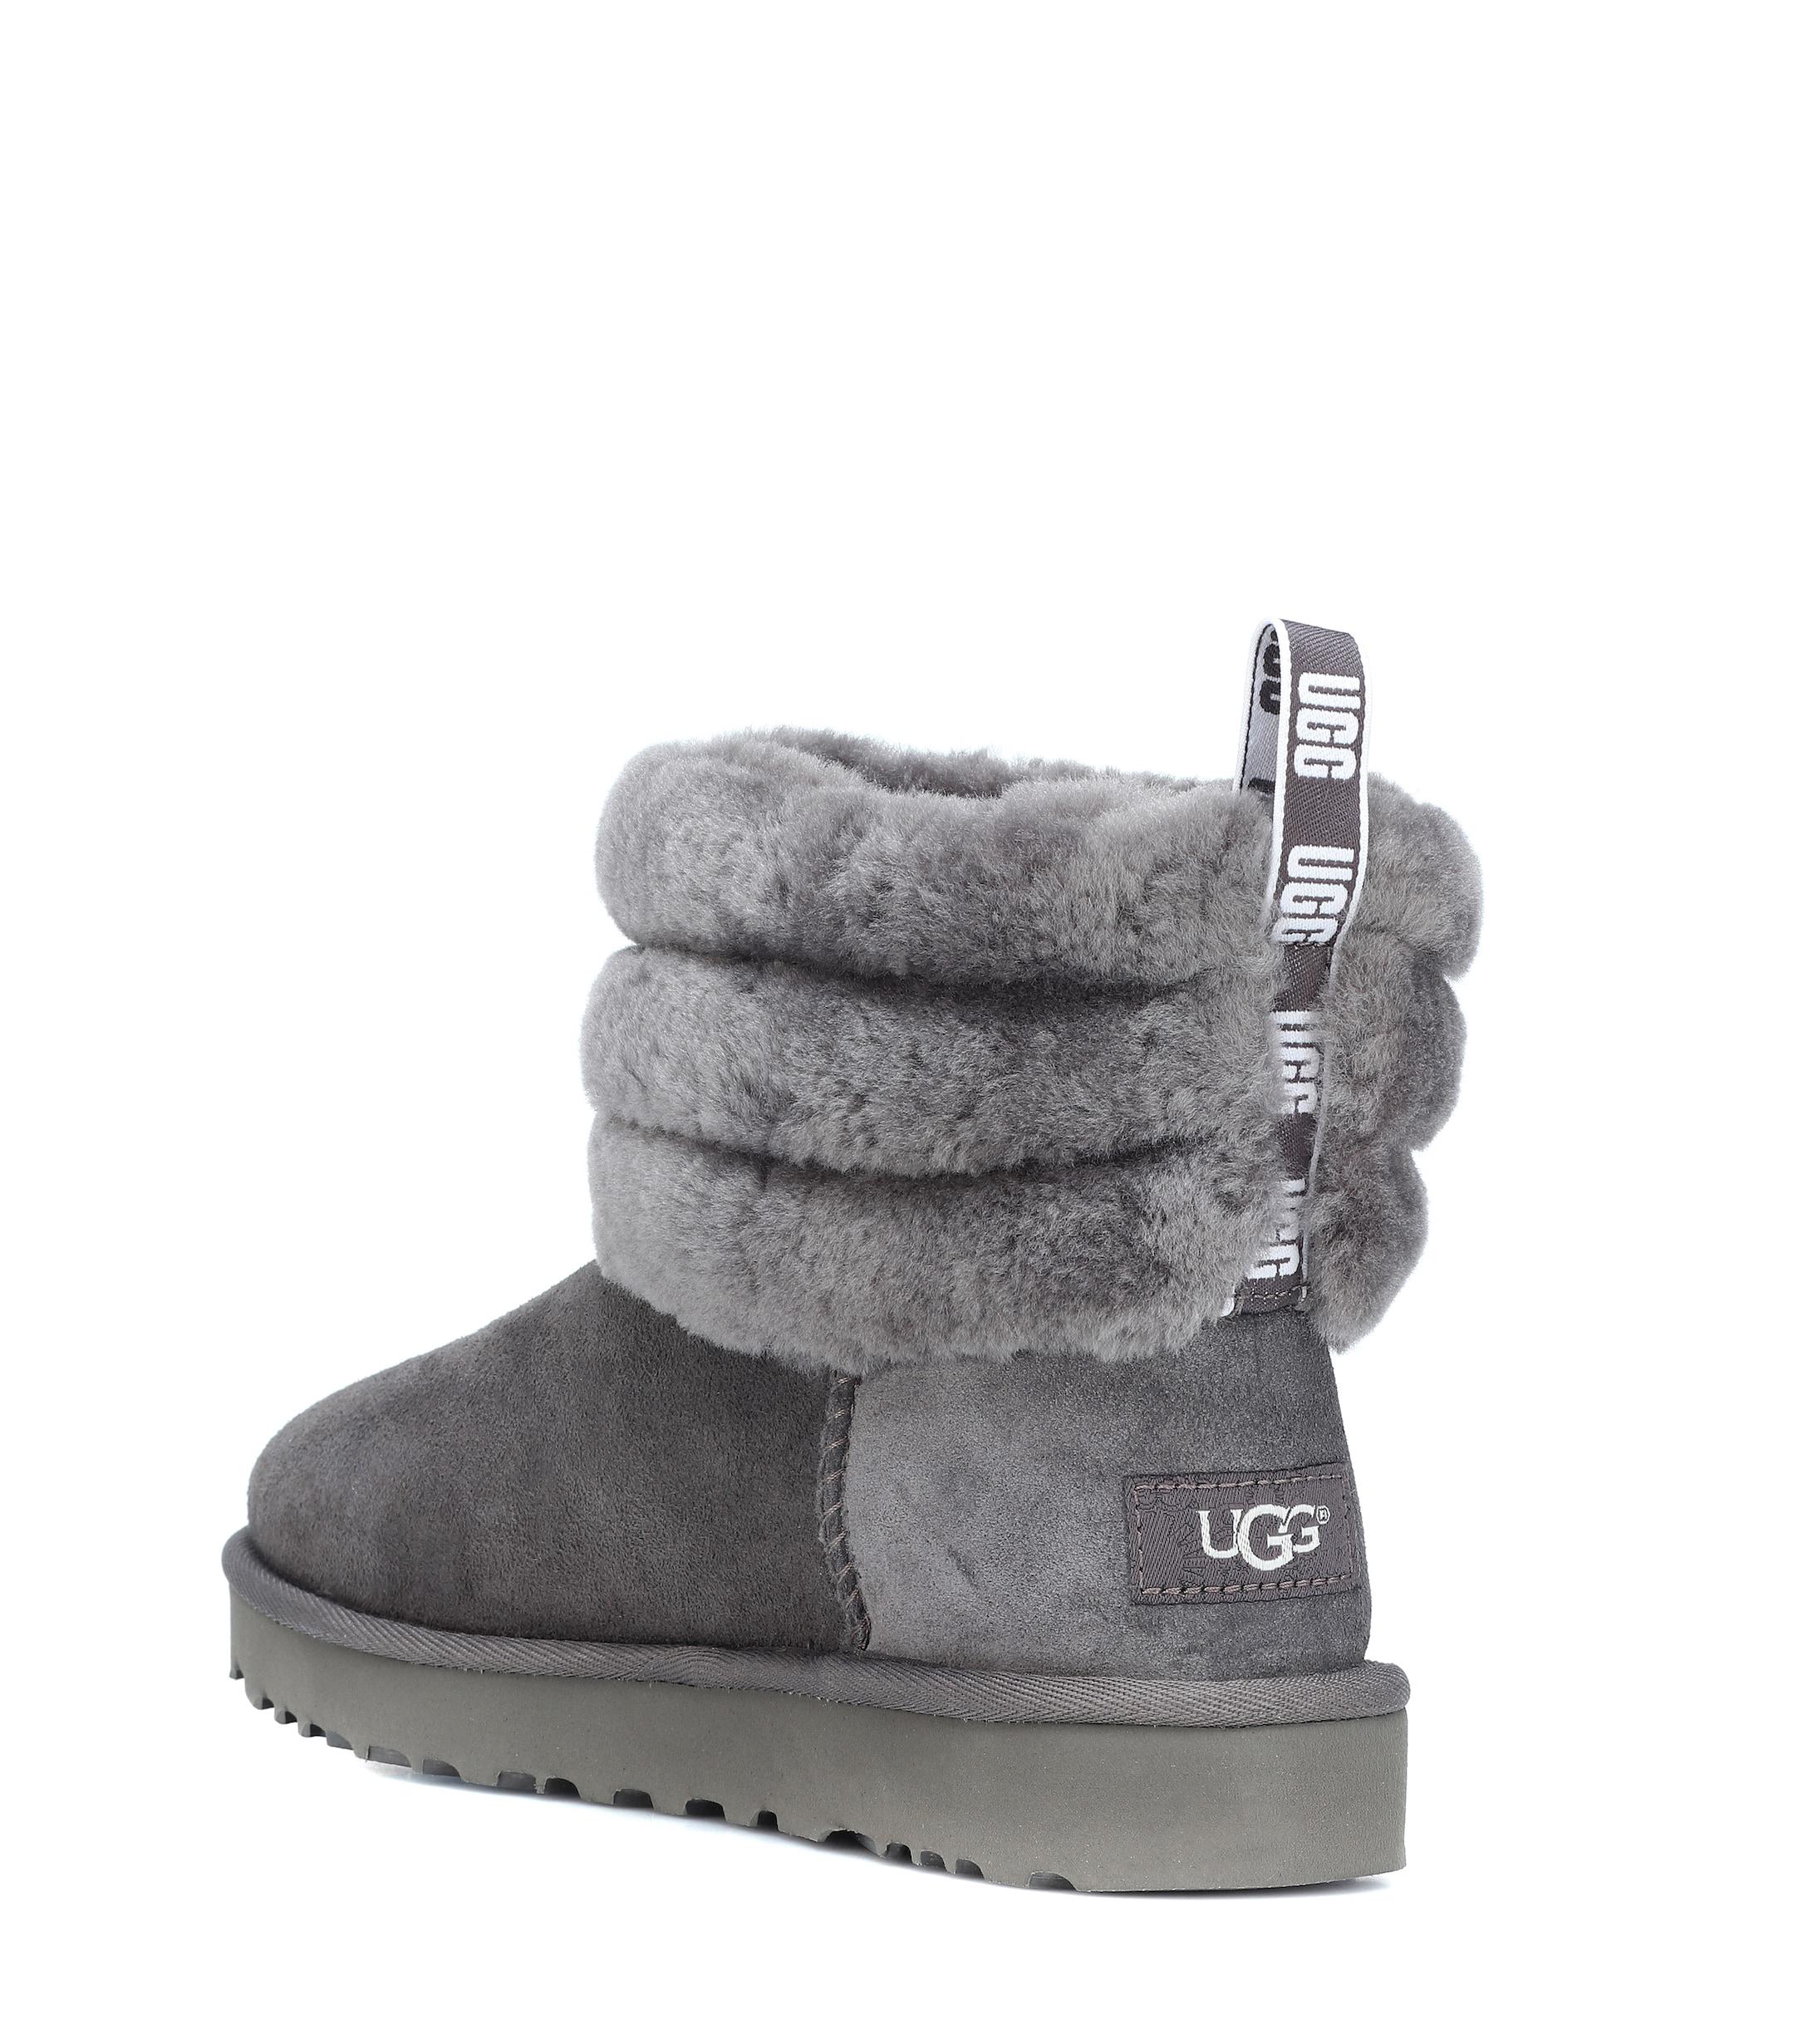 UGG Fluff Mini Quilted Suede Ankle Boots in Grey (Gray) - Lyst